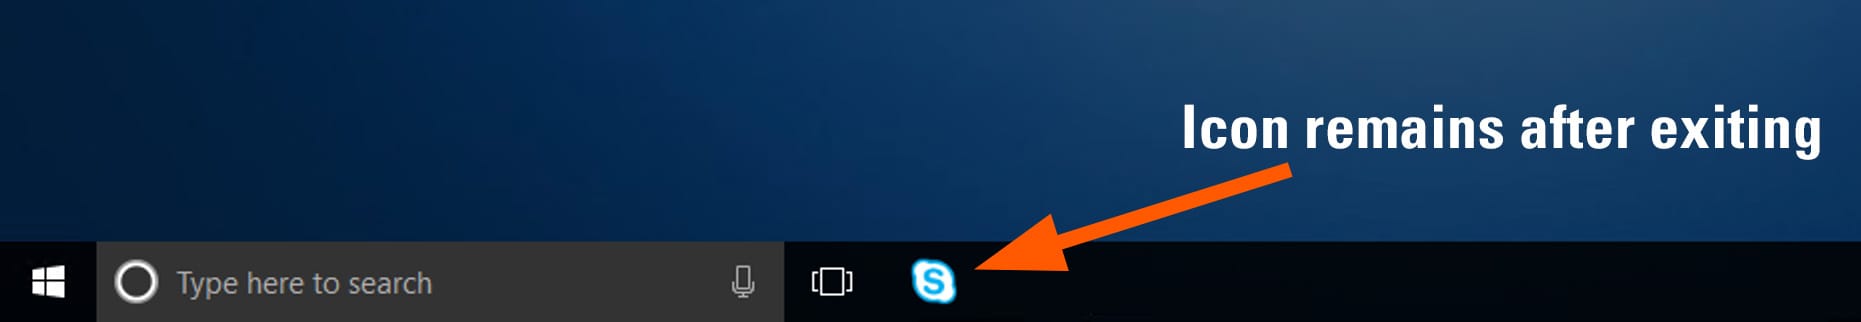 Pin Skype For Business To Windows Taskbar Remote Work For Faculty